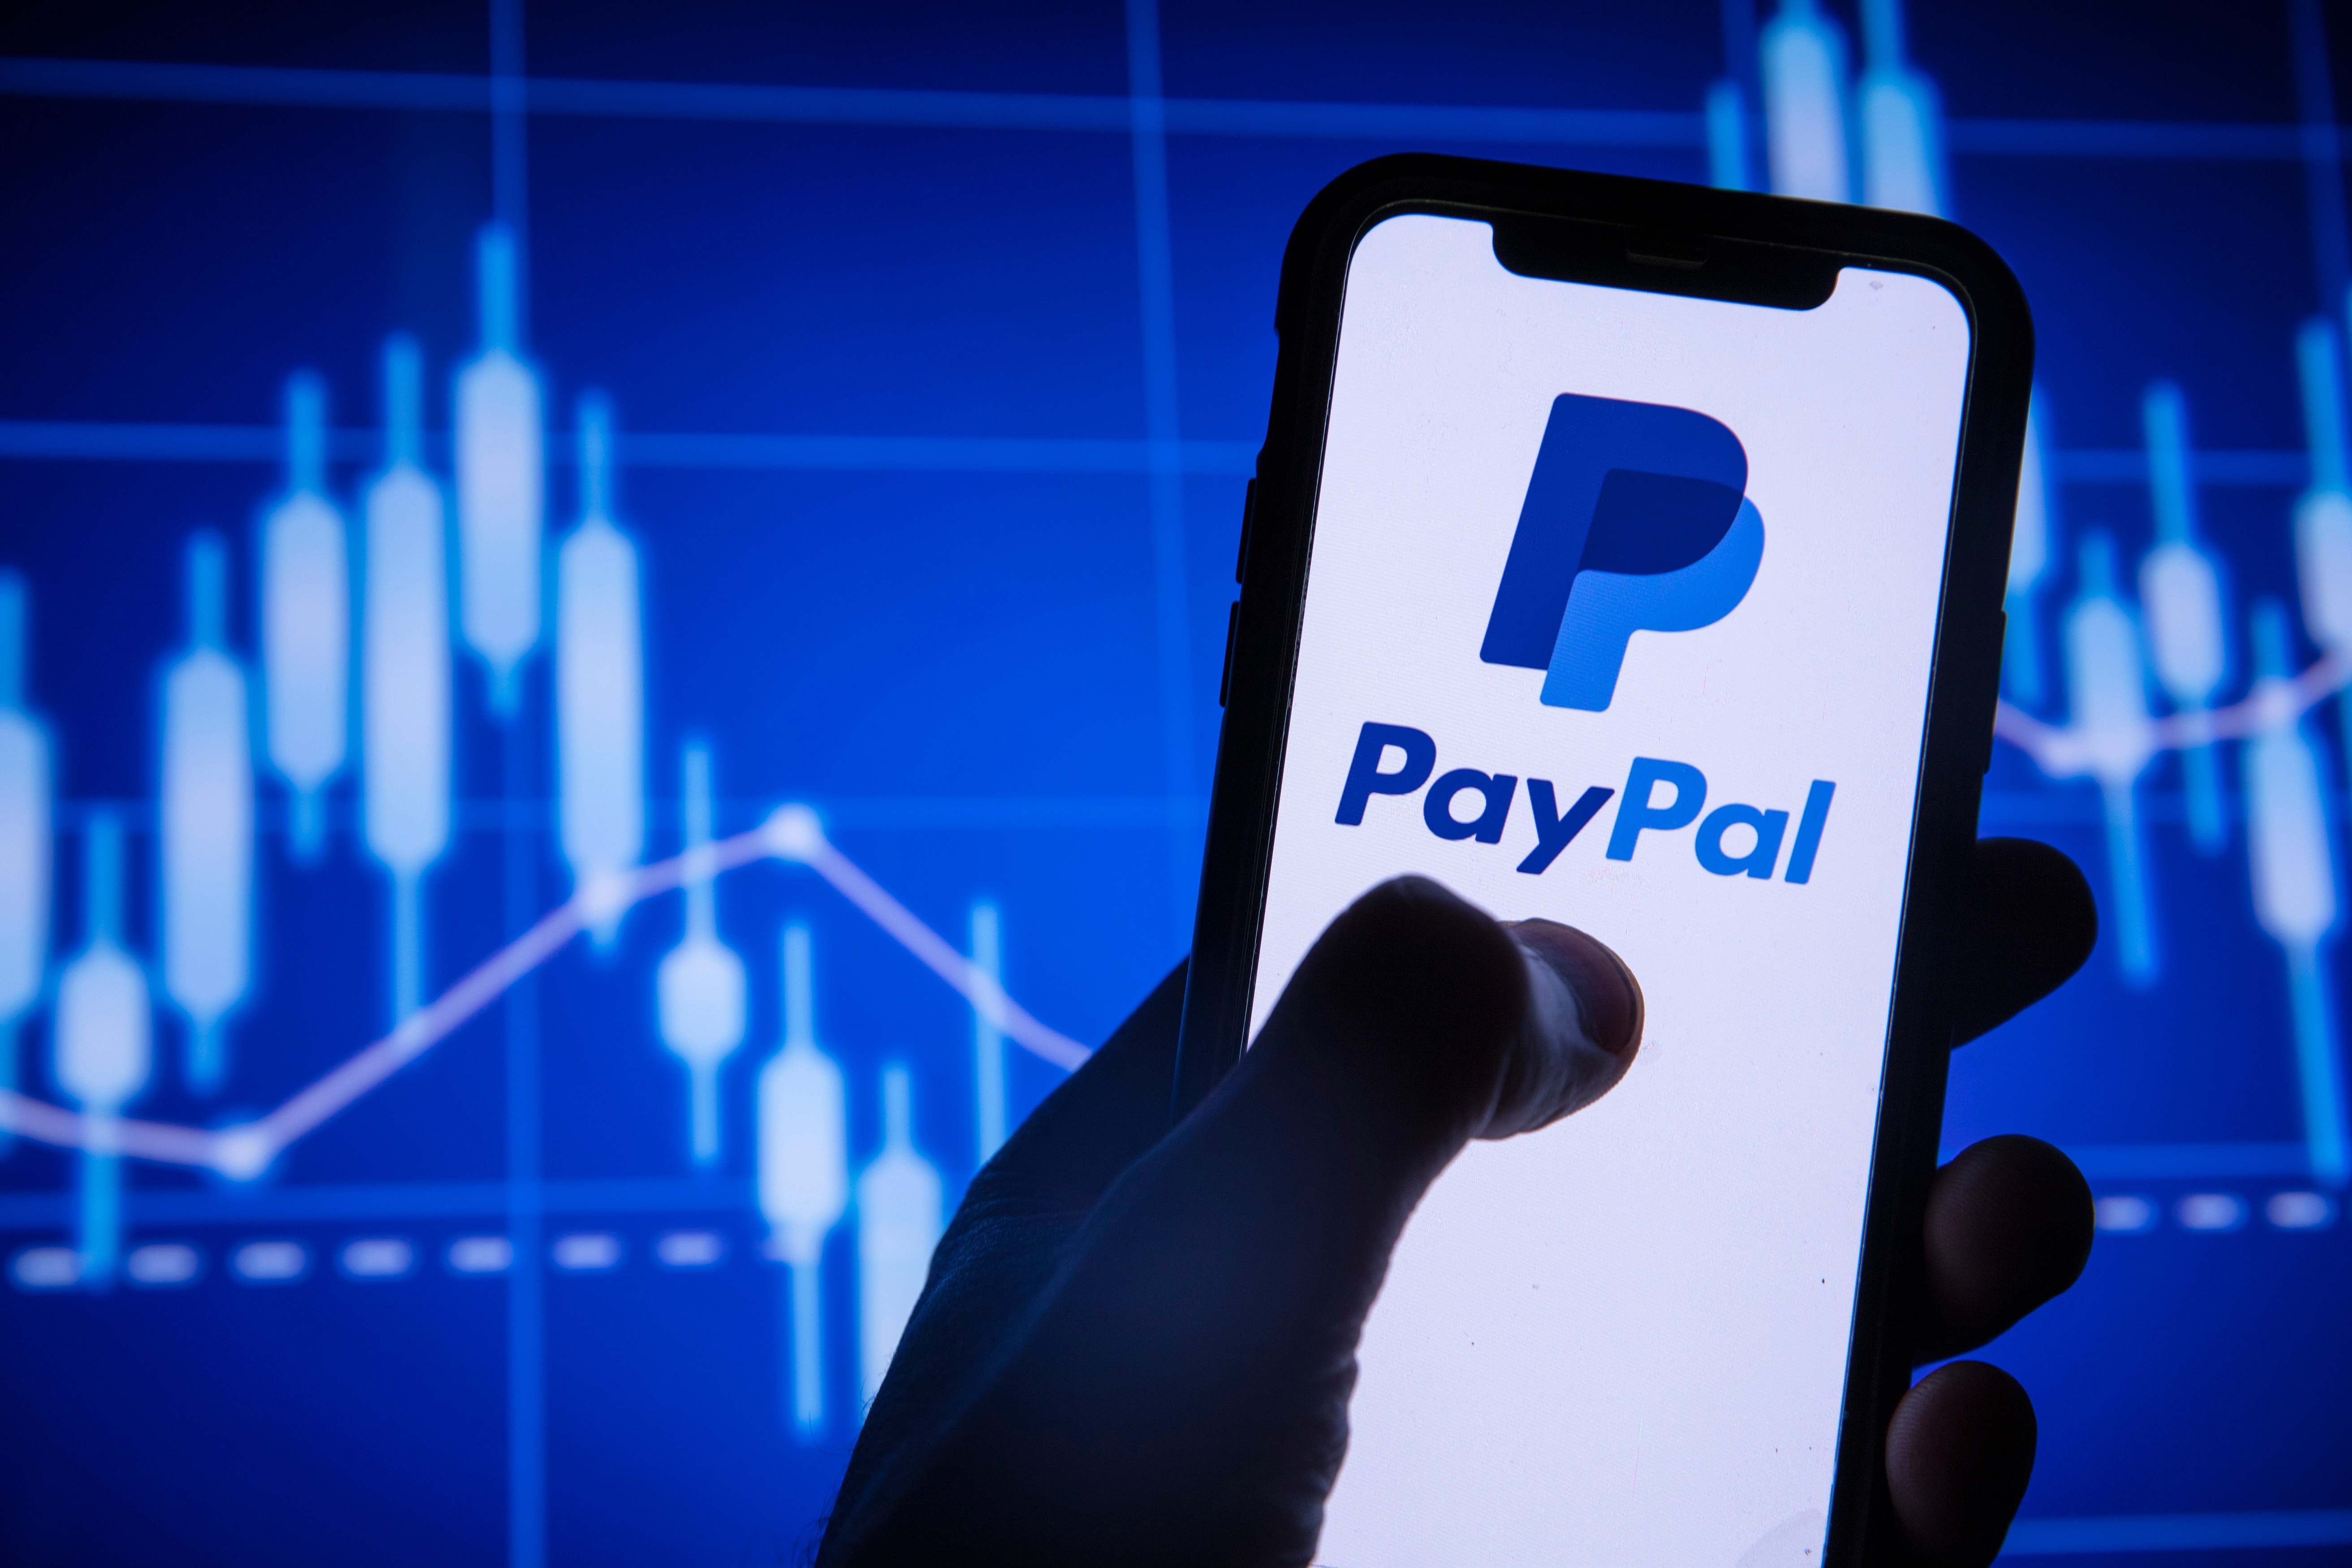 PayPal Stock Takes Off Following Report Of Elliott's Stake Build: What Investors Need to Know